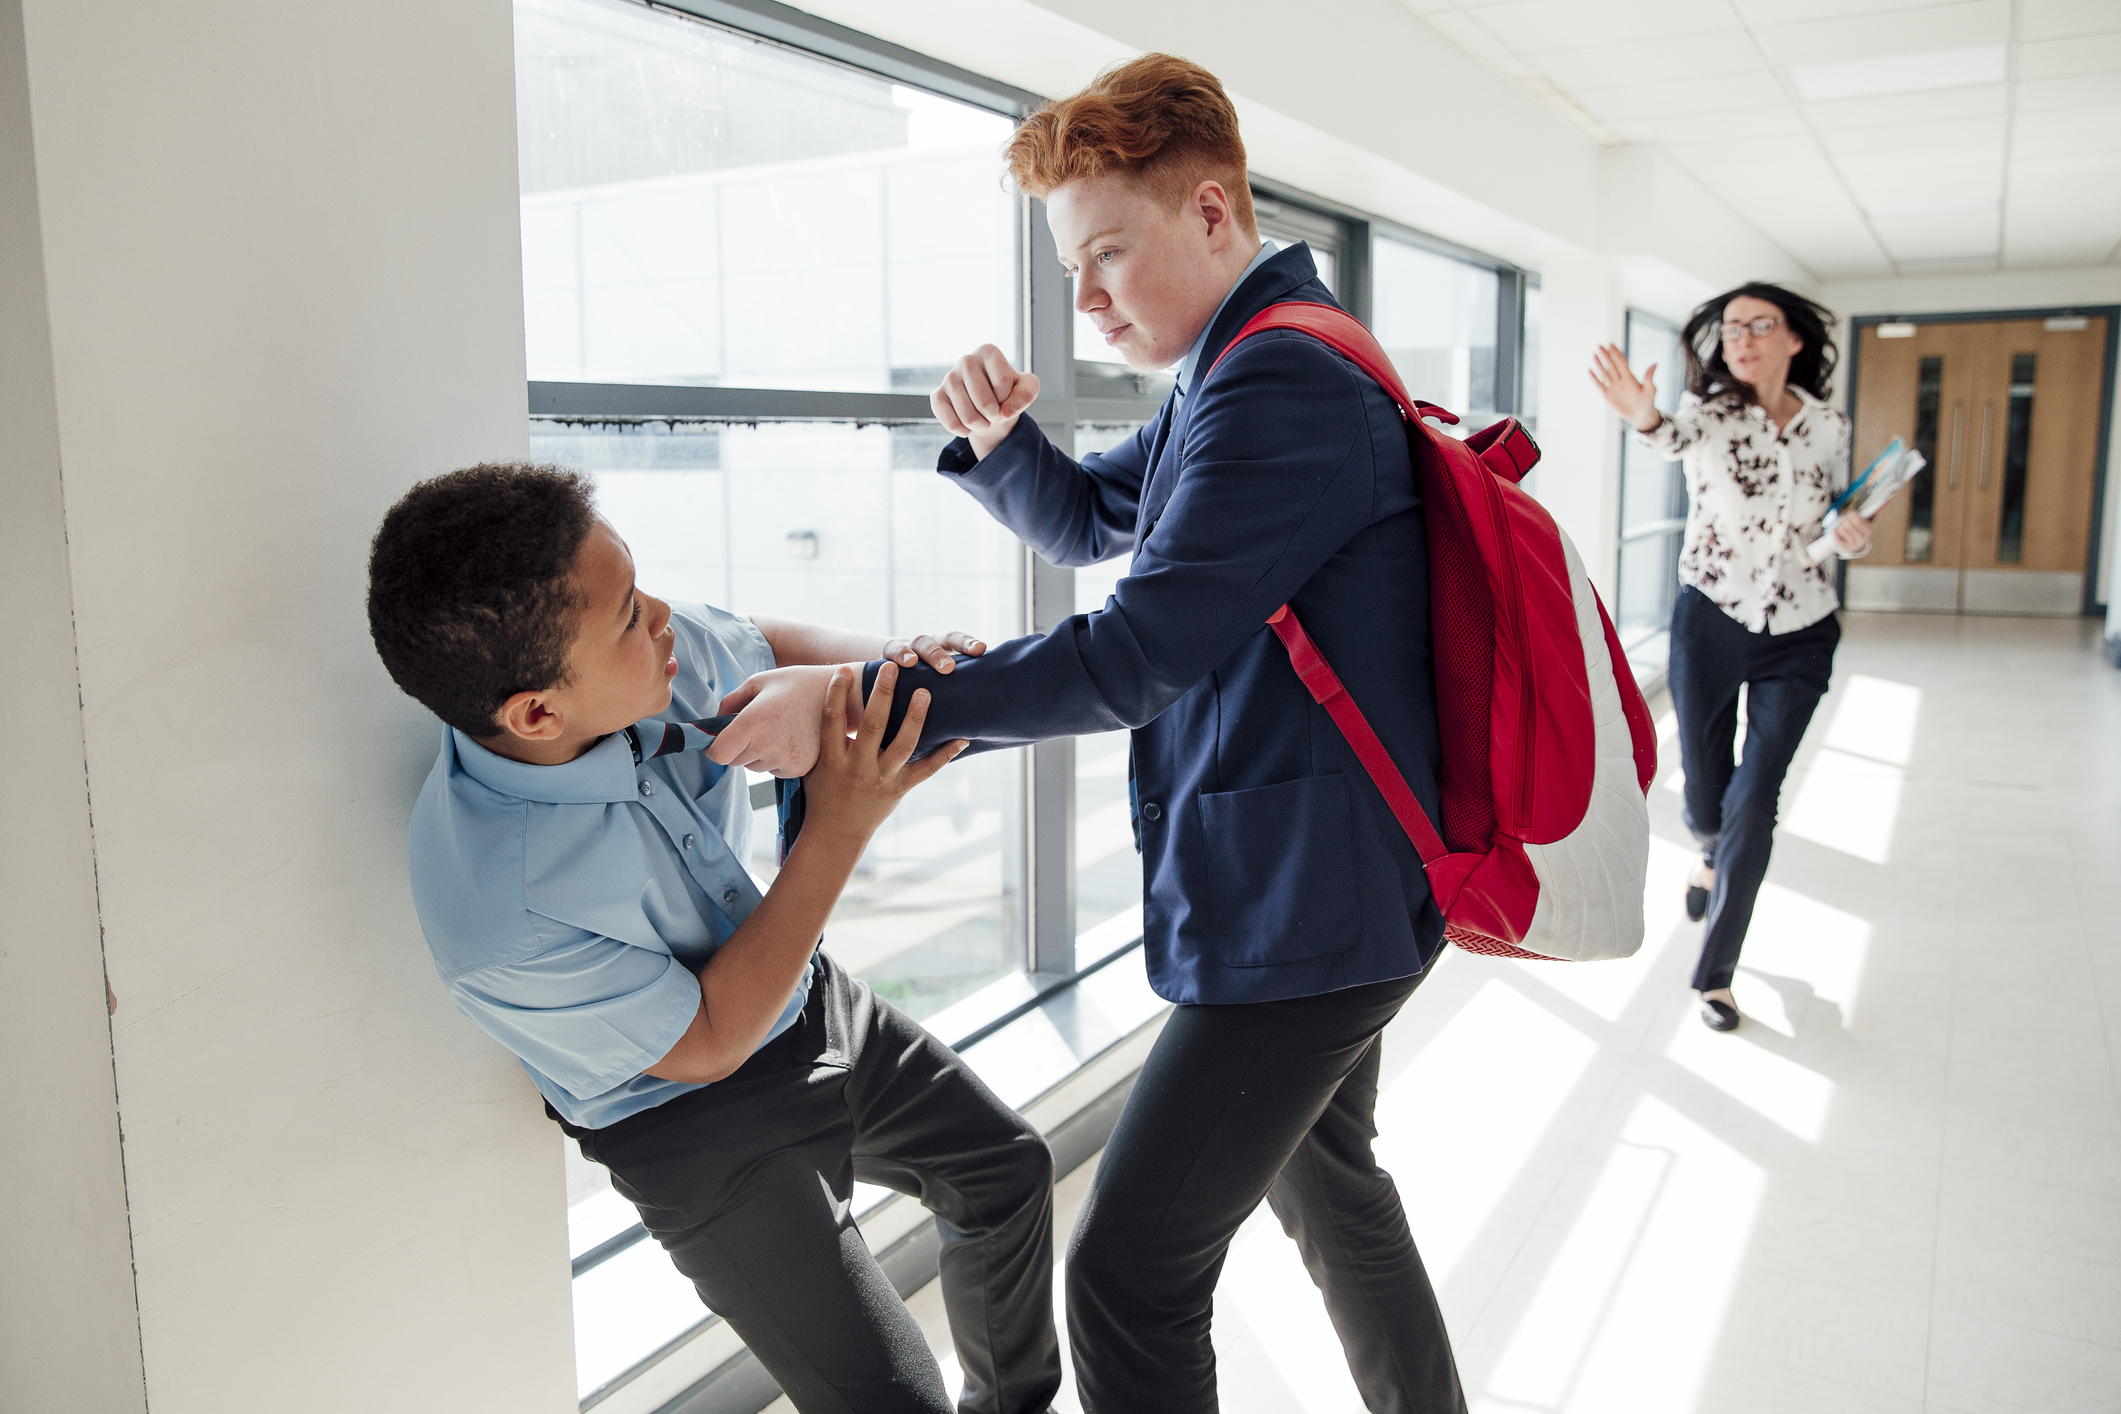 A larger male student is shown with his fist cocked about to punch a smaller student